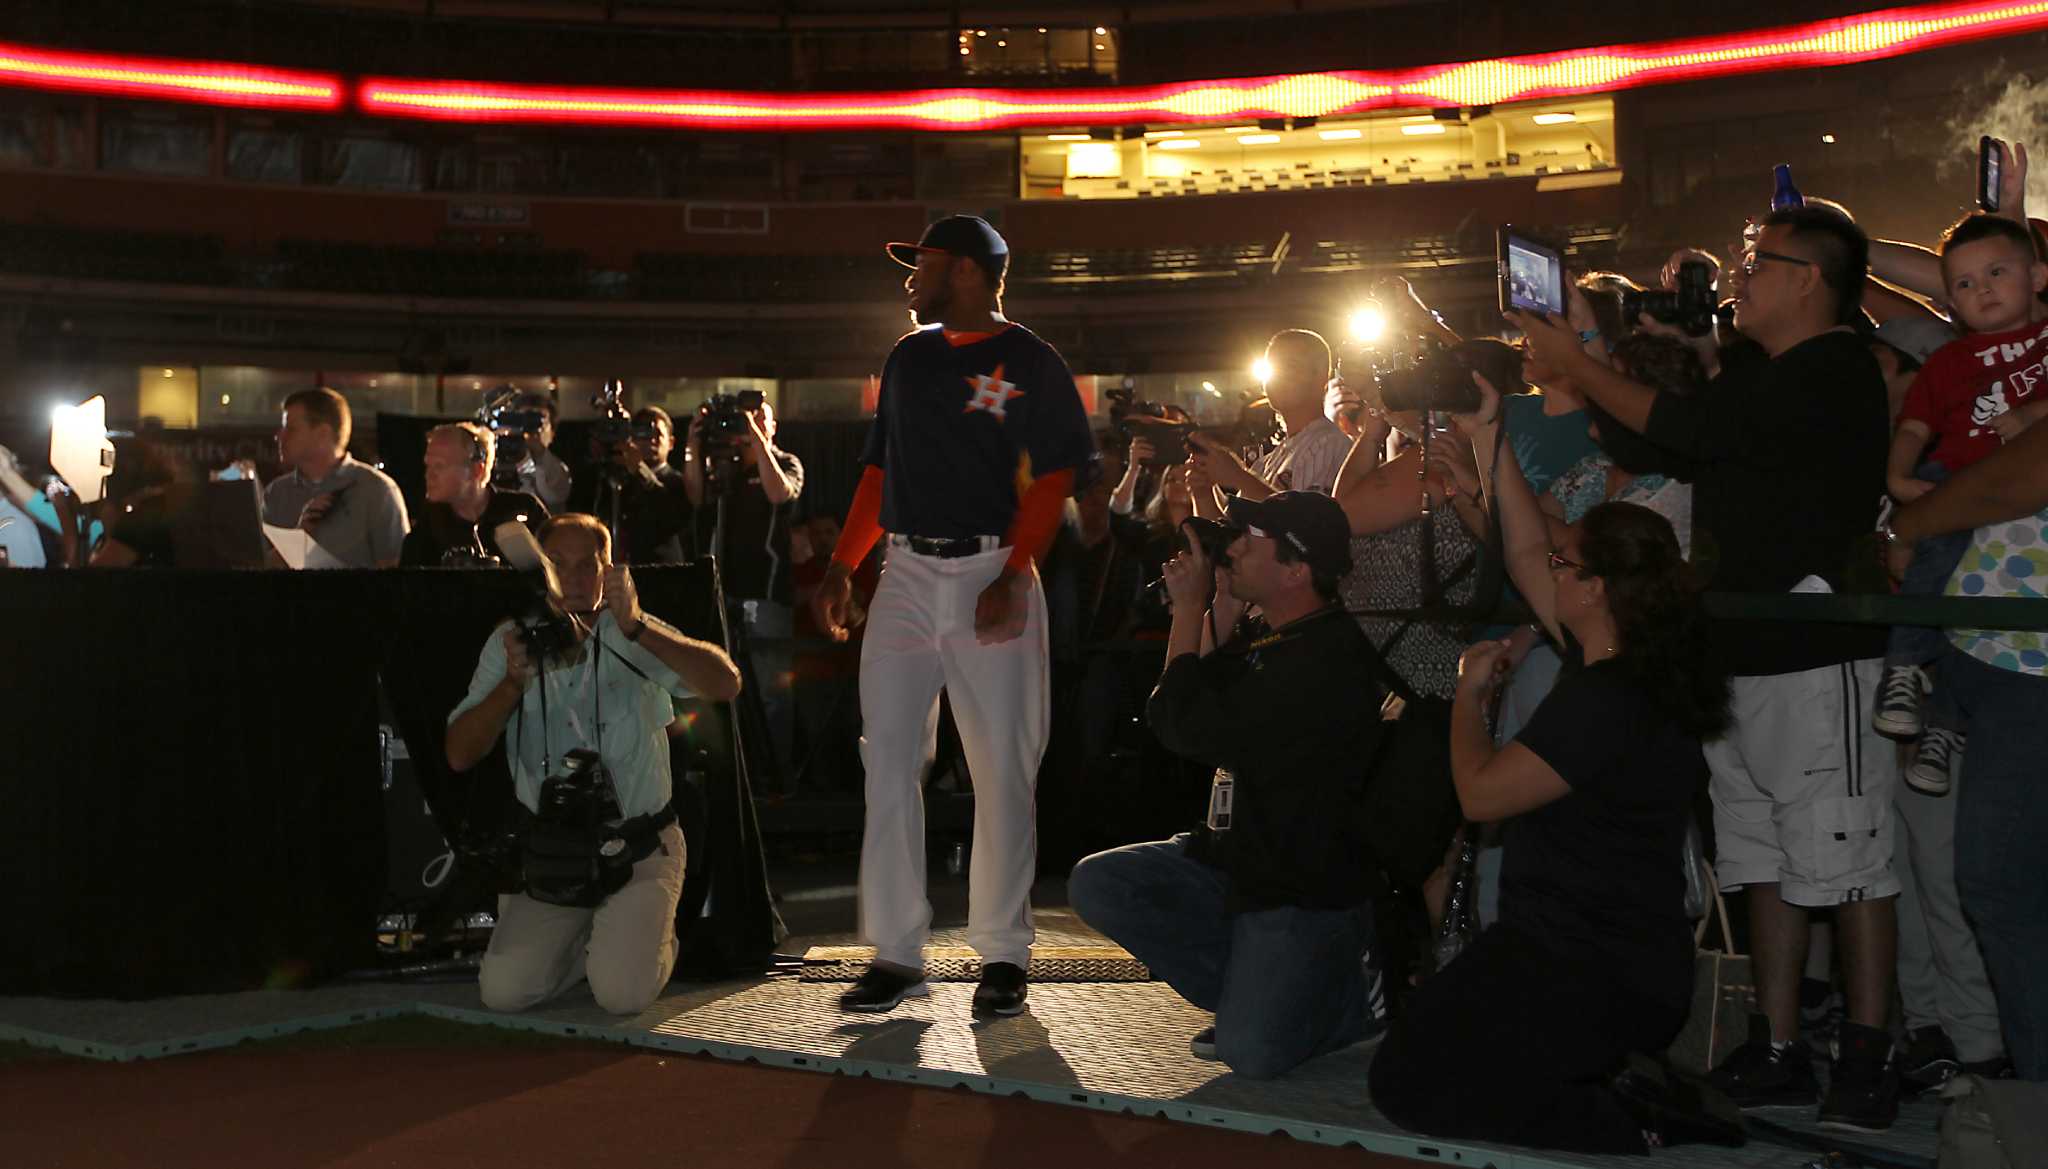 Houston Astros launch new space-themed uniforms debuting soon - CultureMap  Houston